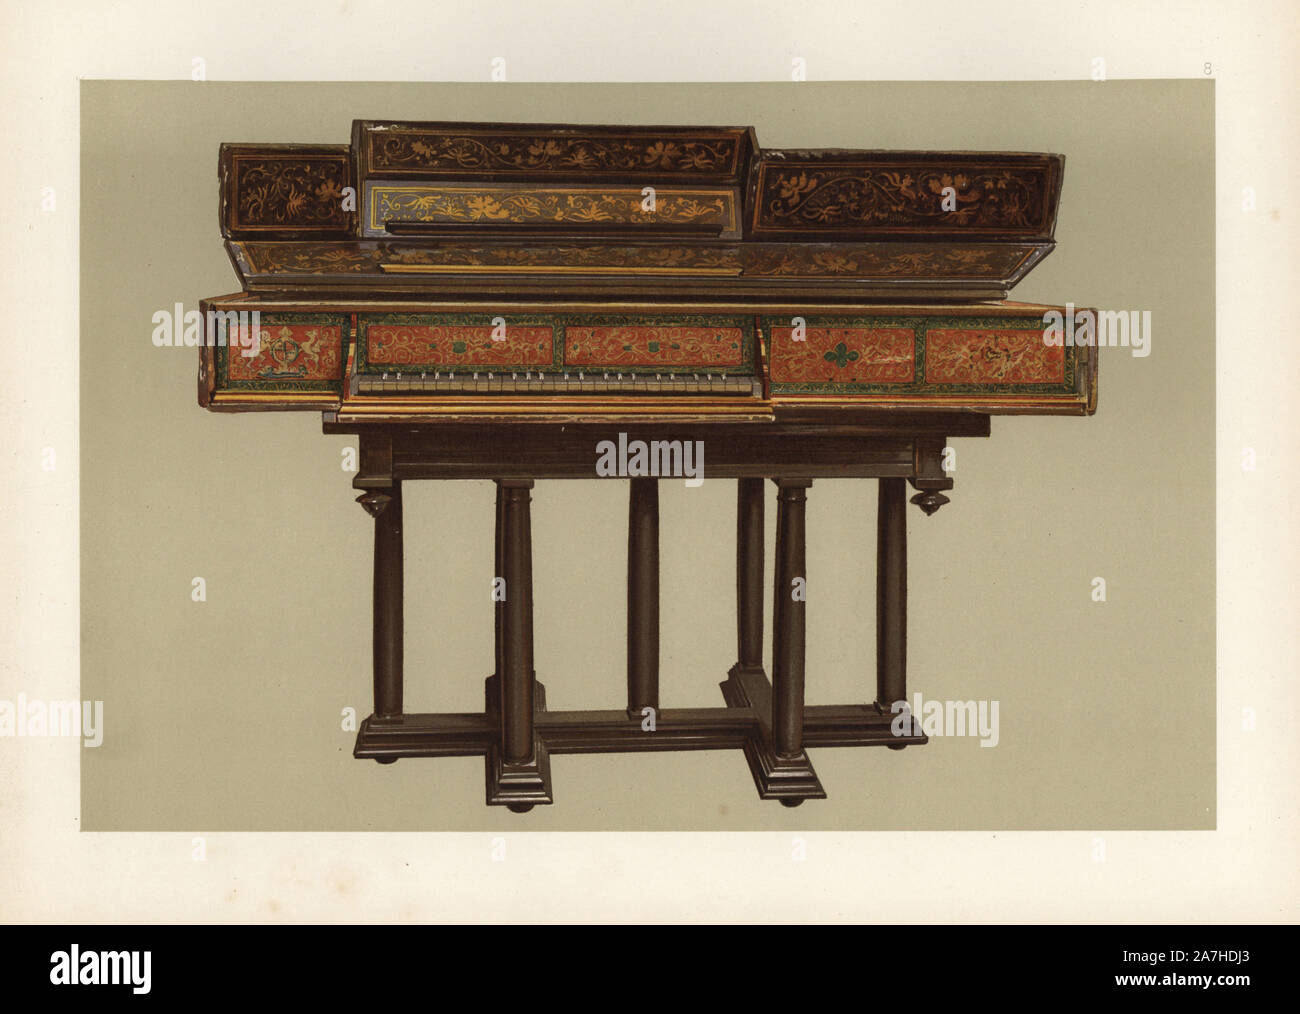 Queen Elizabeth I's virginal, made in Italy circa 1570. Chromolithograph from an illustration by William Gibb from A.J. Hipkins' 'Musical Instruments, Historic, Rare and Unique,' Adam and Charles Black, Edinburgh, 1888. Alfred James Hipkins (1826-1903) was an English musicologist who specialized in the history of the pianoforte and other instruments. William Gibb was a master illustrator and chromolithographer and illustrated 'The Royal House of Stuart' (1890), 'Naval and Military Trophies' (1896), and others. Stock Photo